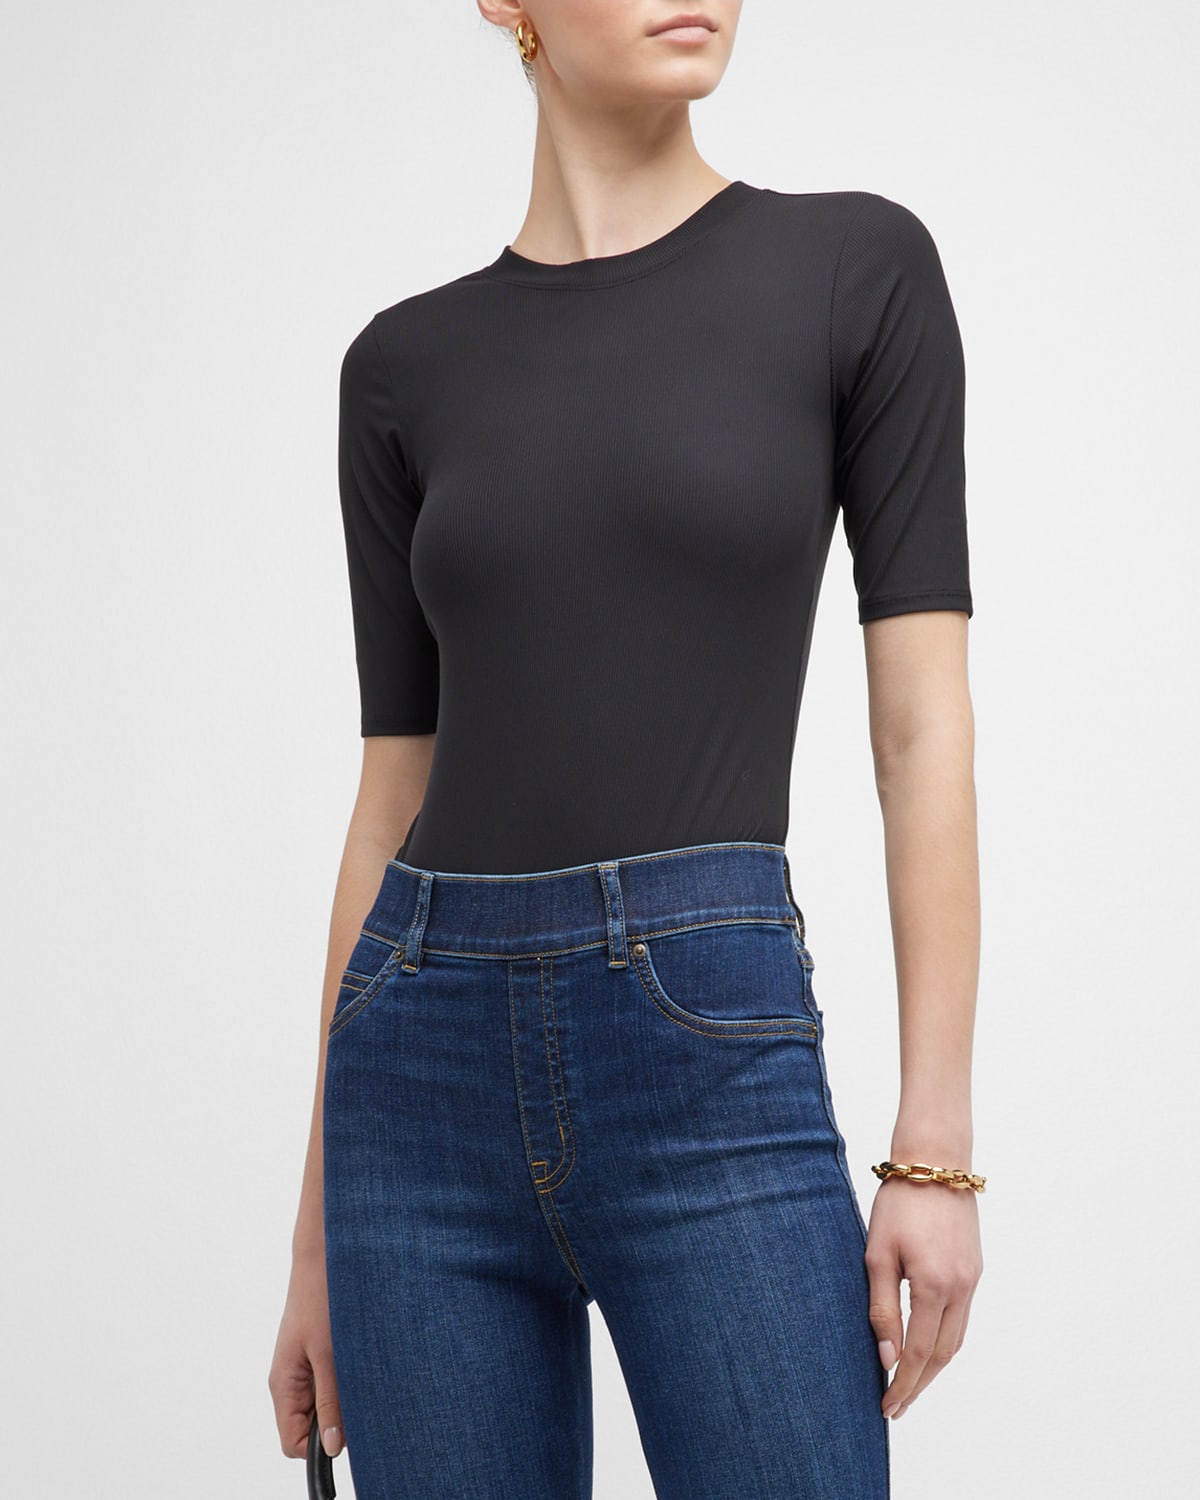 Suit Yourself Ribbed Short-Sleeve Bodysuit